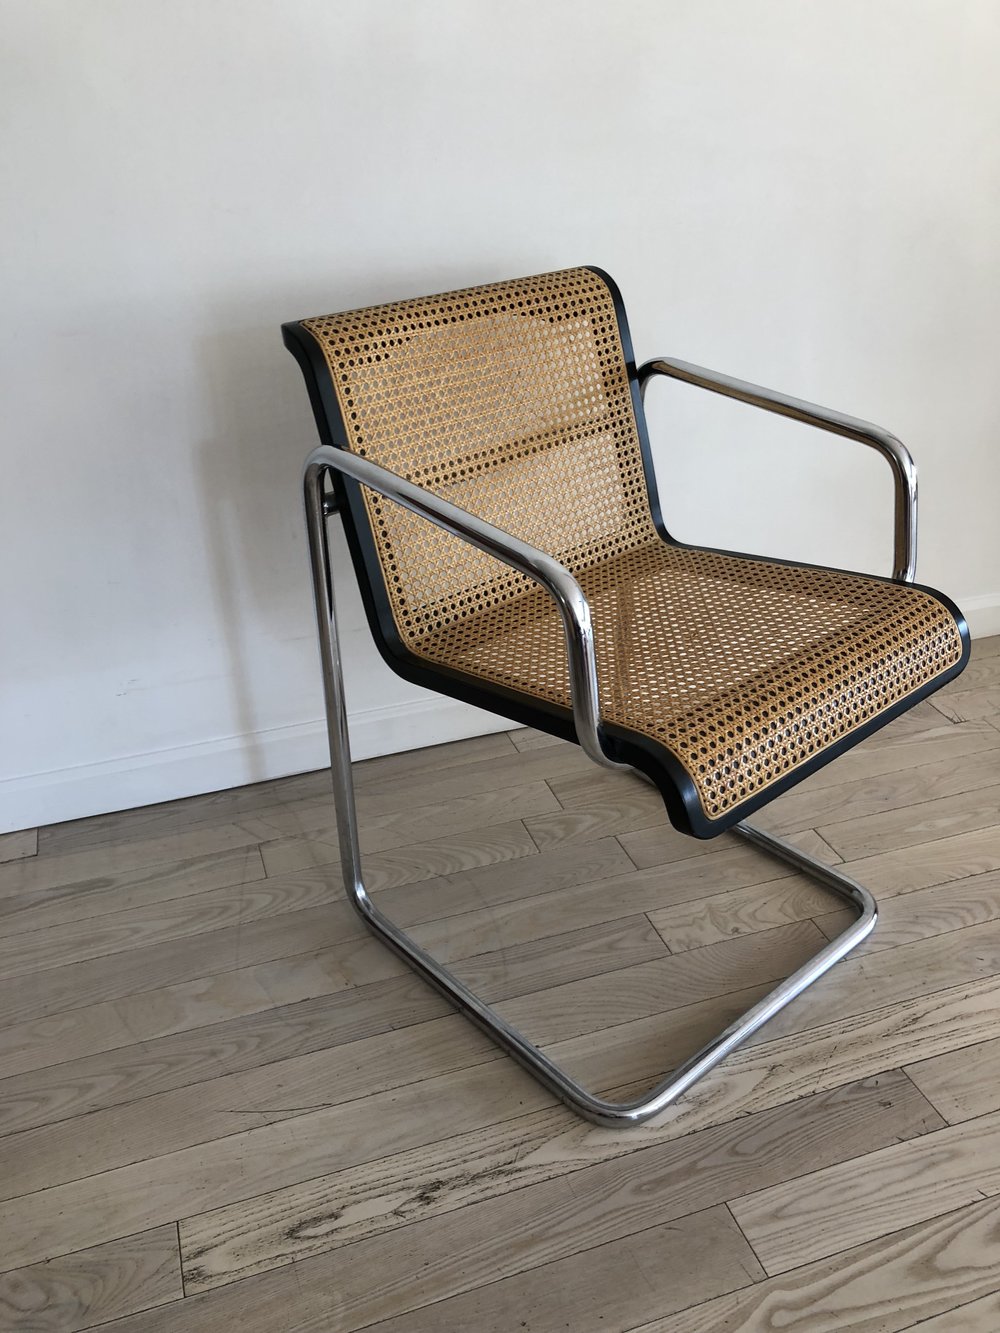 1970s Thonet Cane and Chrome Cantilever Arm Chair